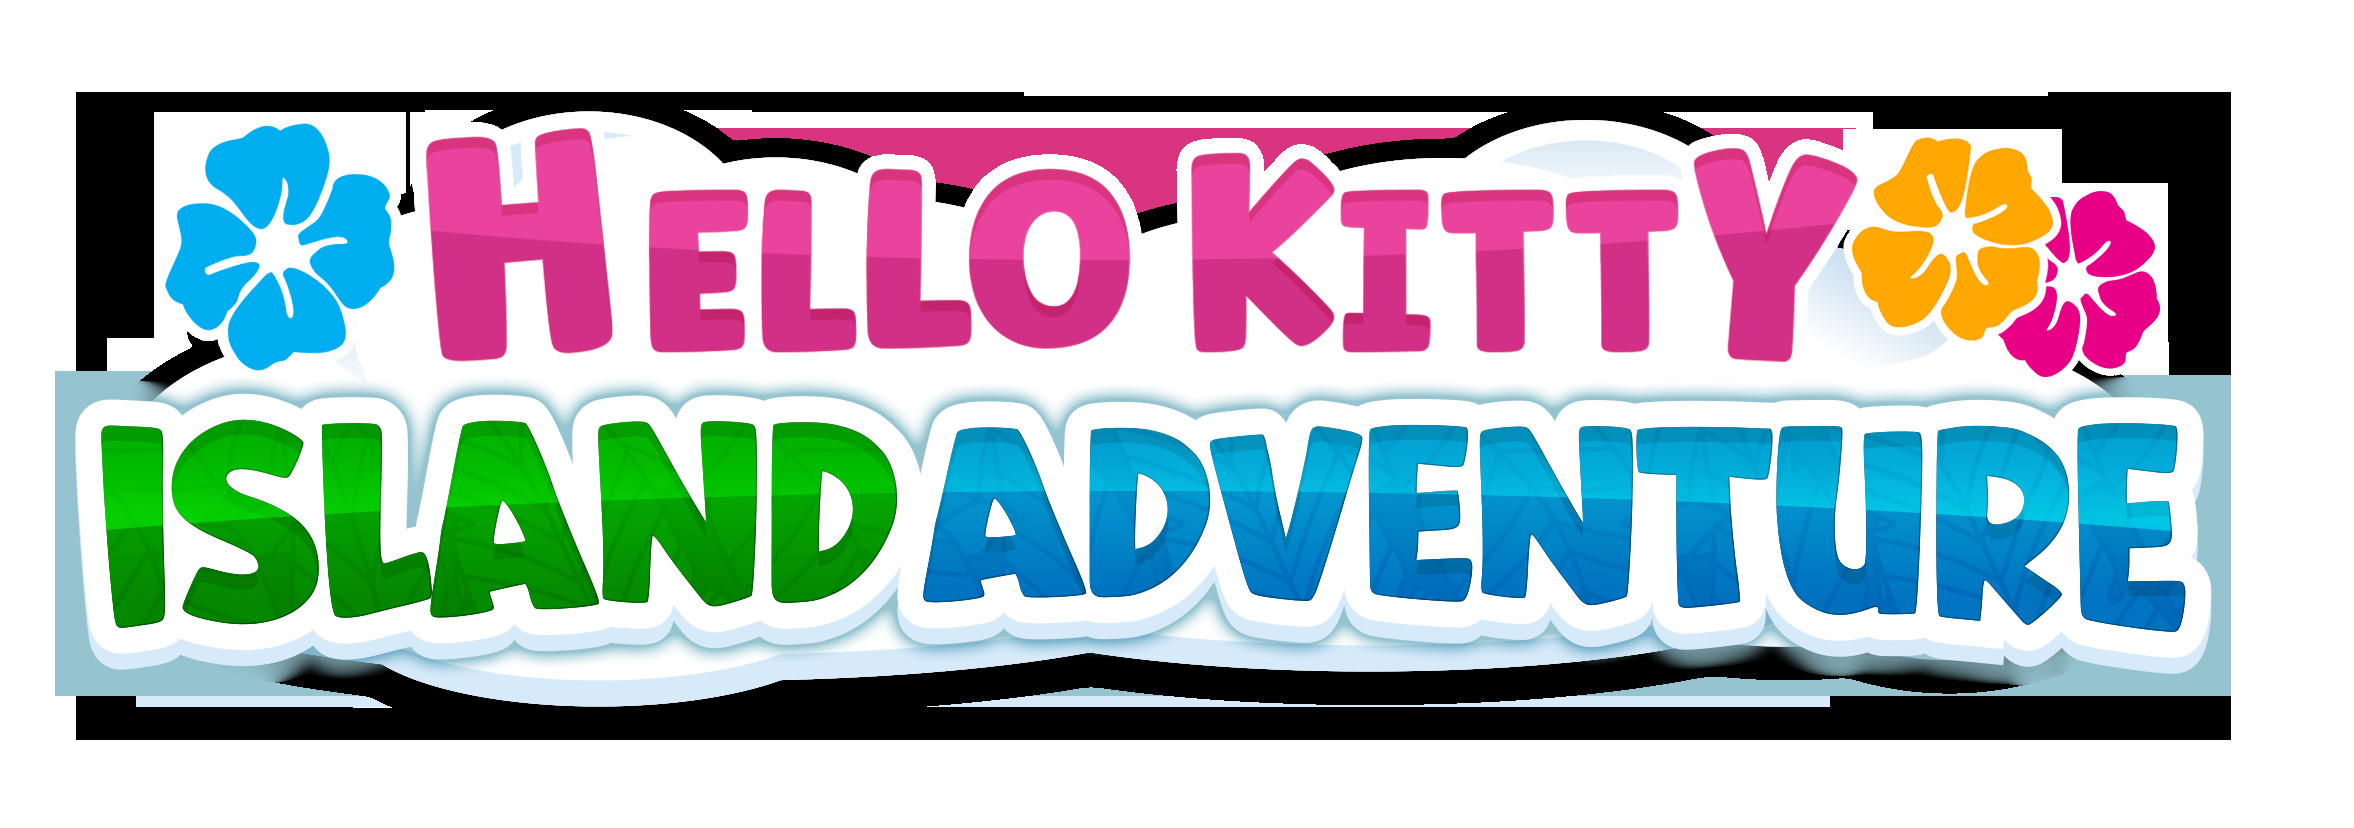 Hello Kitty and Friends' life simulation game comes to Apple Arcade -  9to5Mac